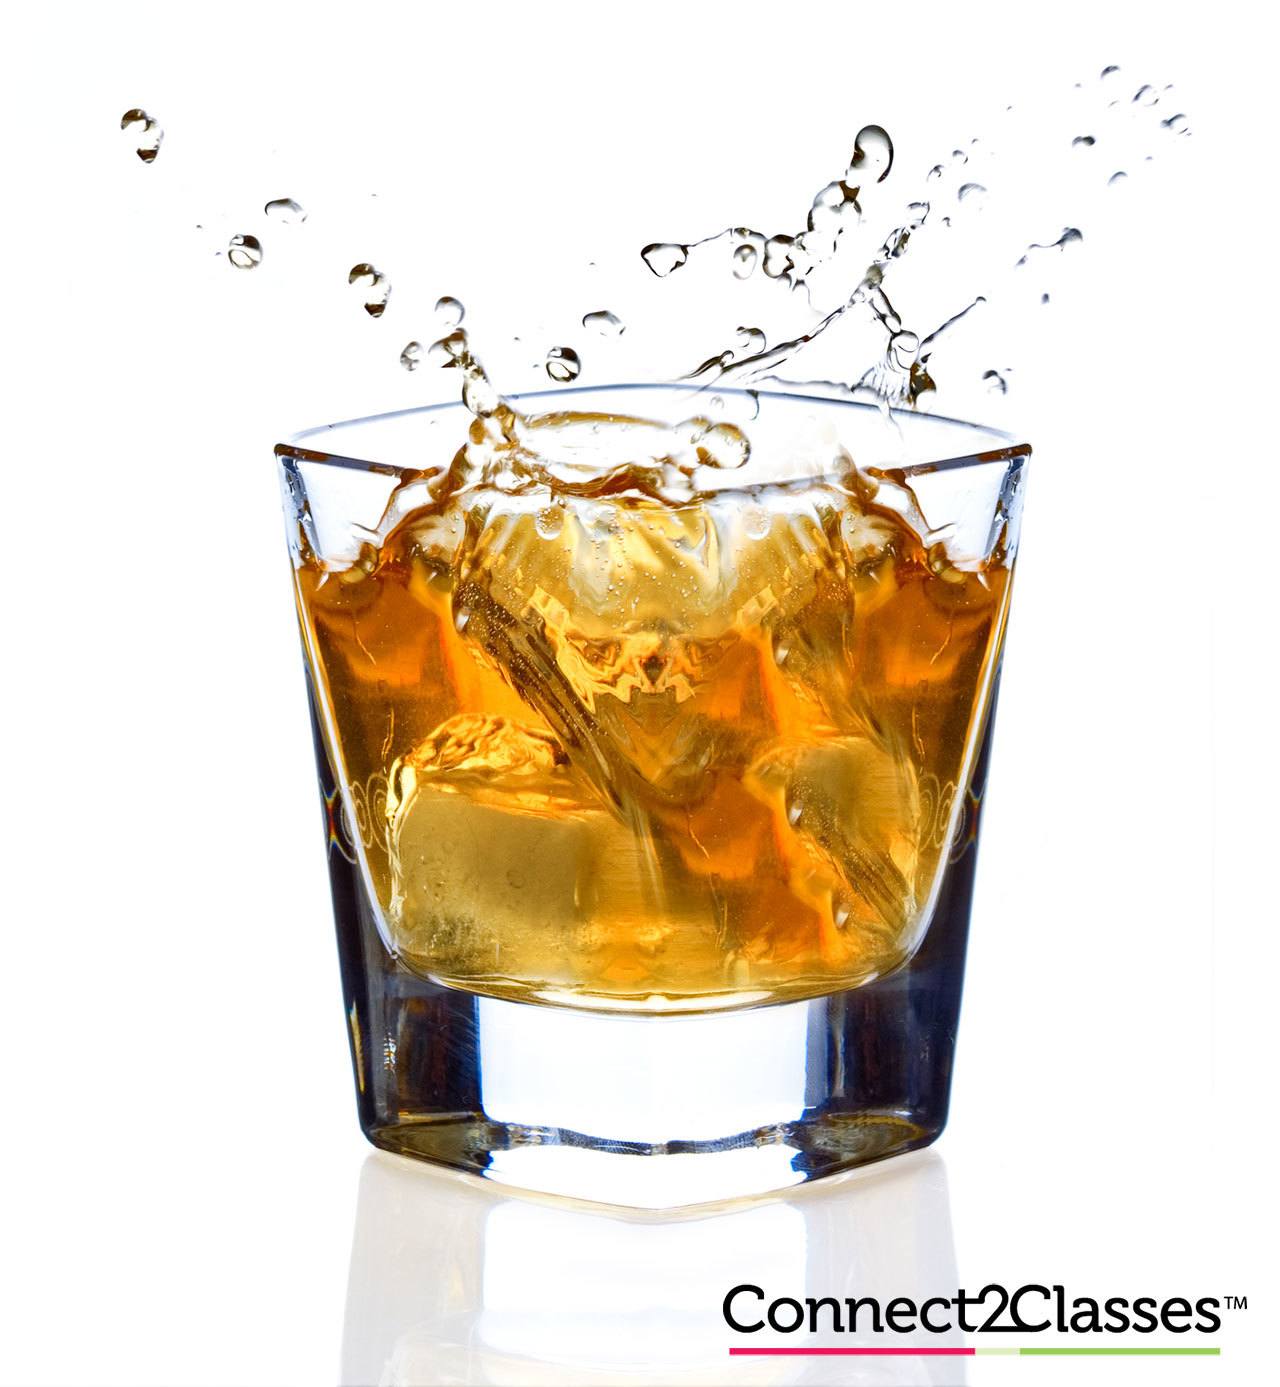 American novelist Raymond Chandler once said, “There is no bad whiskey. There are only some whiskeys that aren’t as good as others.” That may be true, but learning to understand whiskey’s subtleties and tasting notes can be a rewarding experience that leads to a deeper appreciation and knowledge of the malted grain spirit.